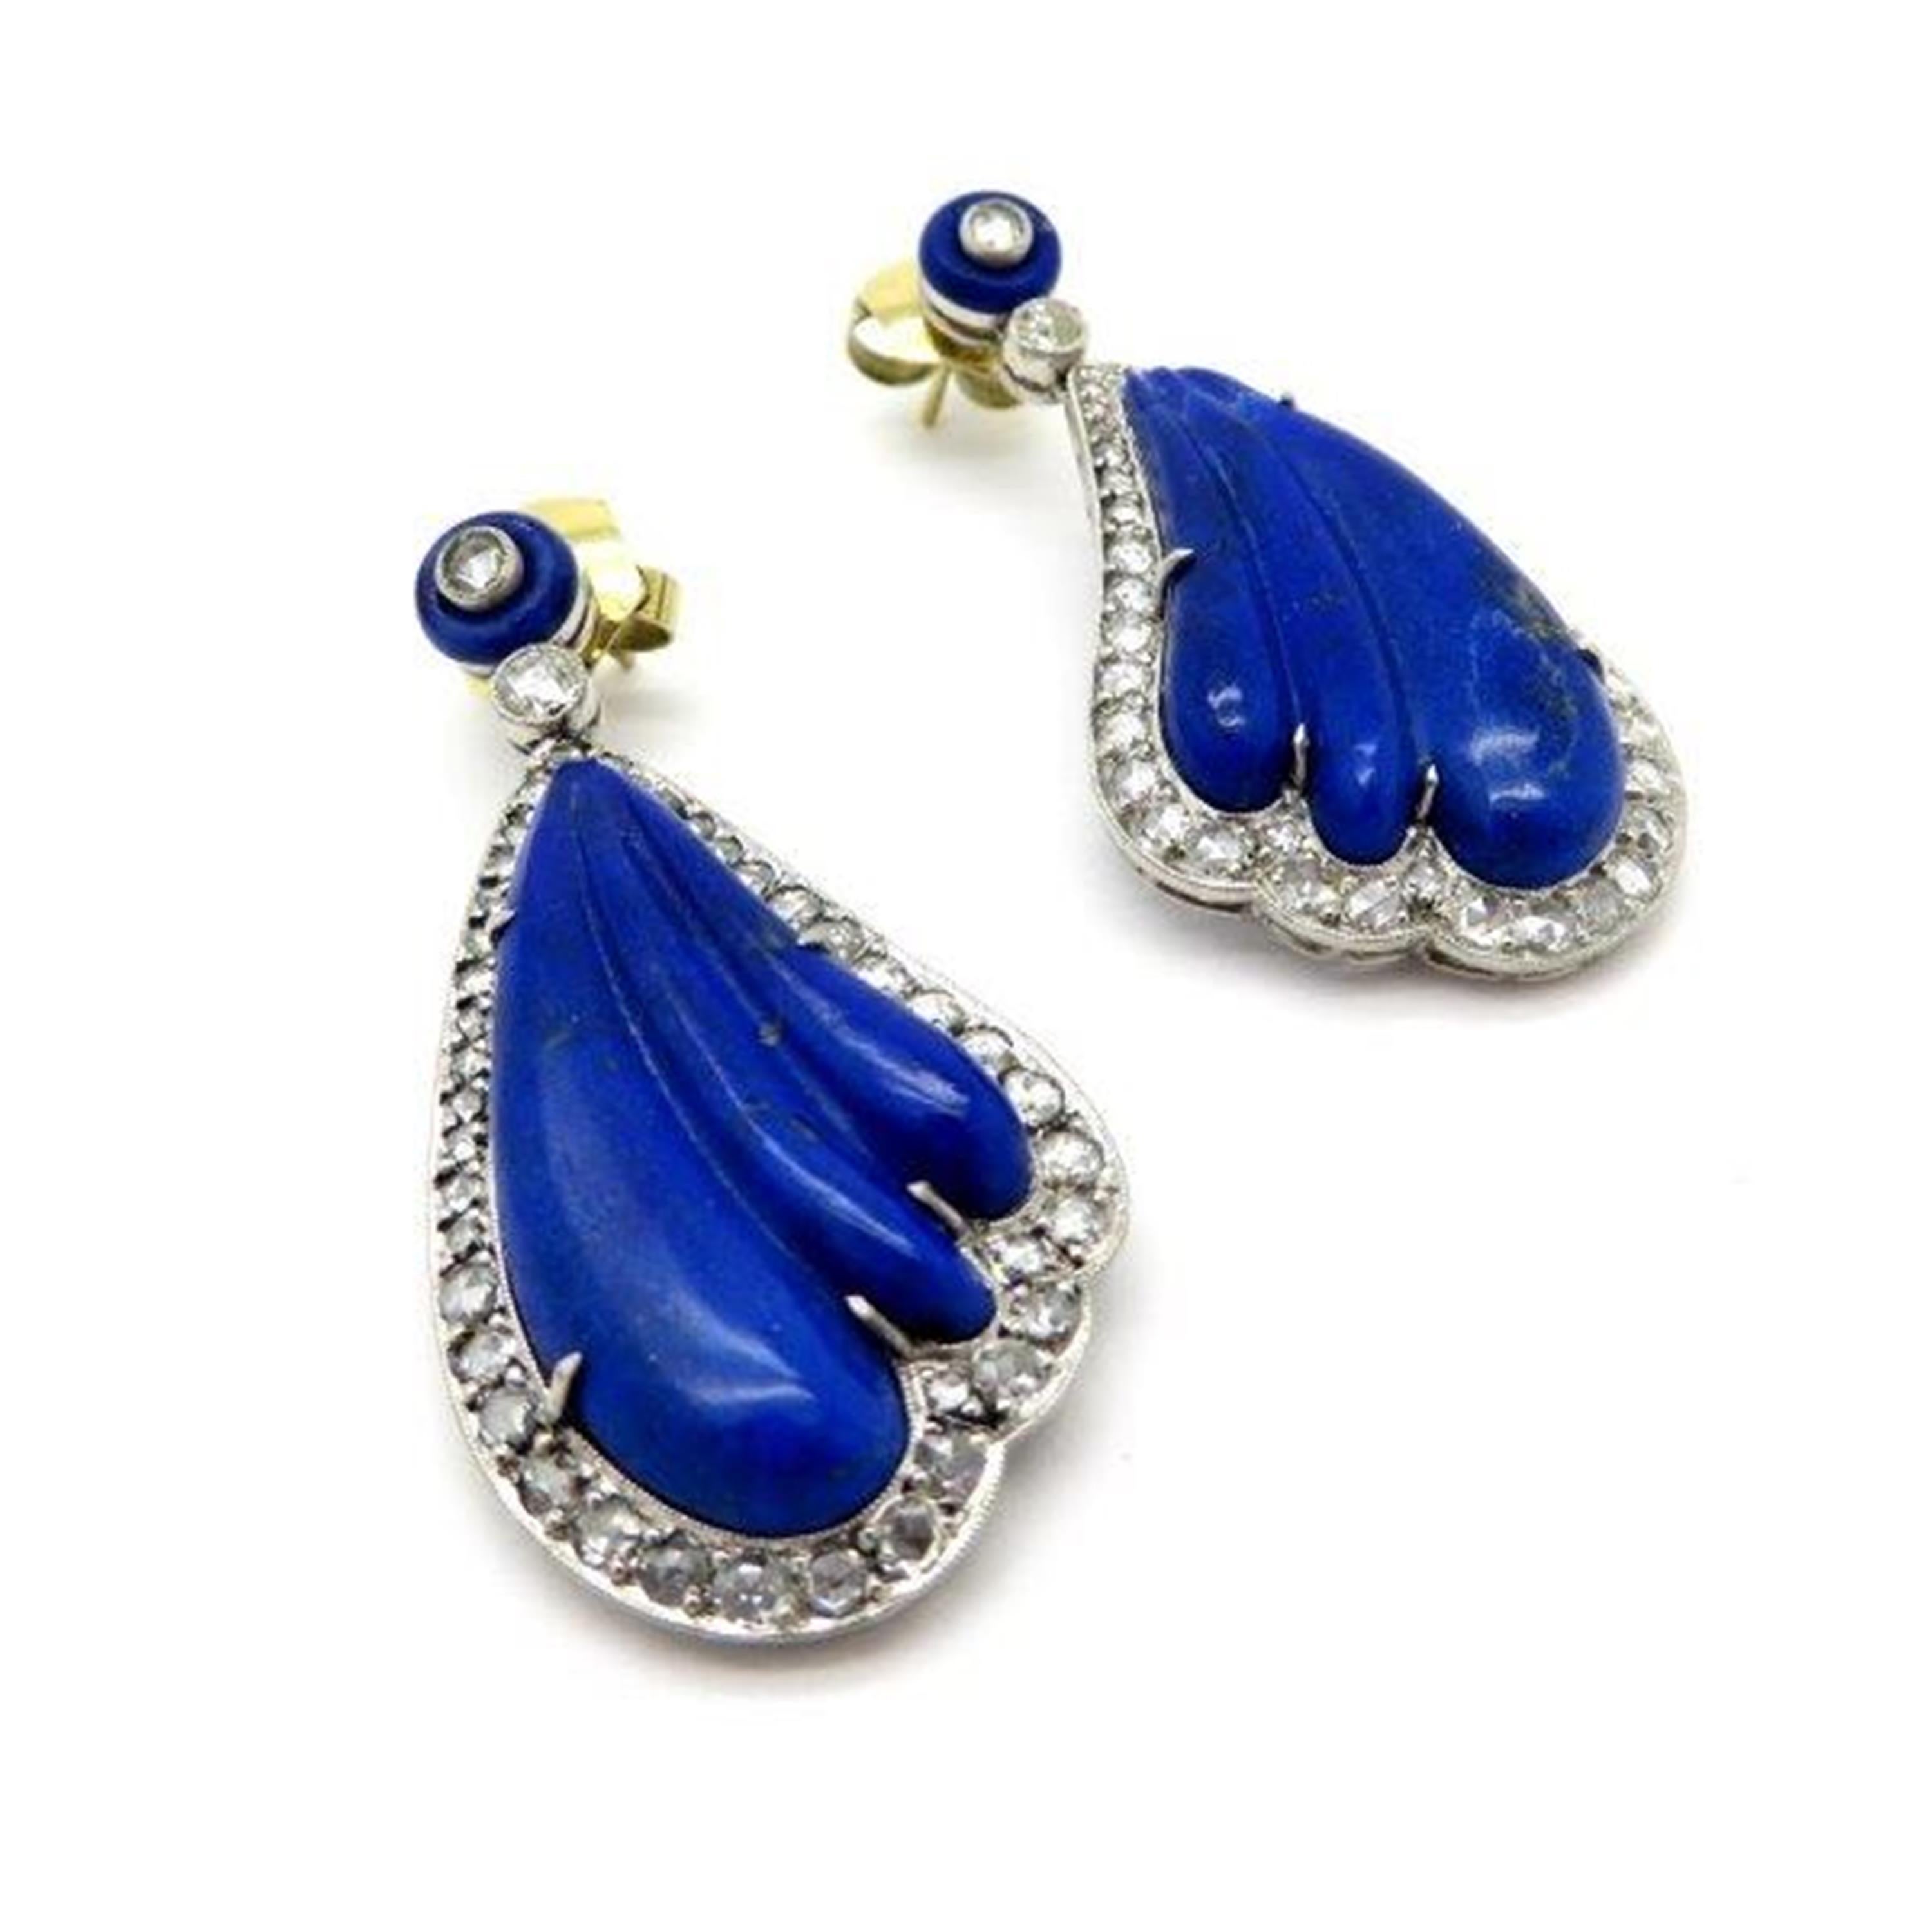 Estate platinum lapis lazuli and diamond dangle earrings.  Displaying two fine quality scalloped carved lapis lazuli gemstones weighing a combined total of 25.16 carats. Accented with 86 rose cut diamonds, with various measurements, weighing a